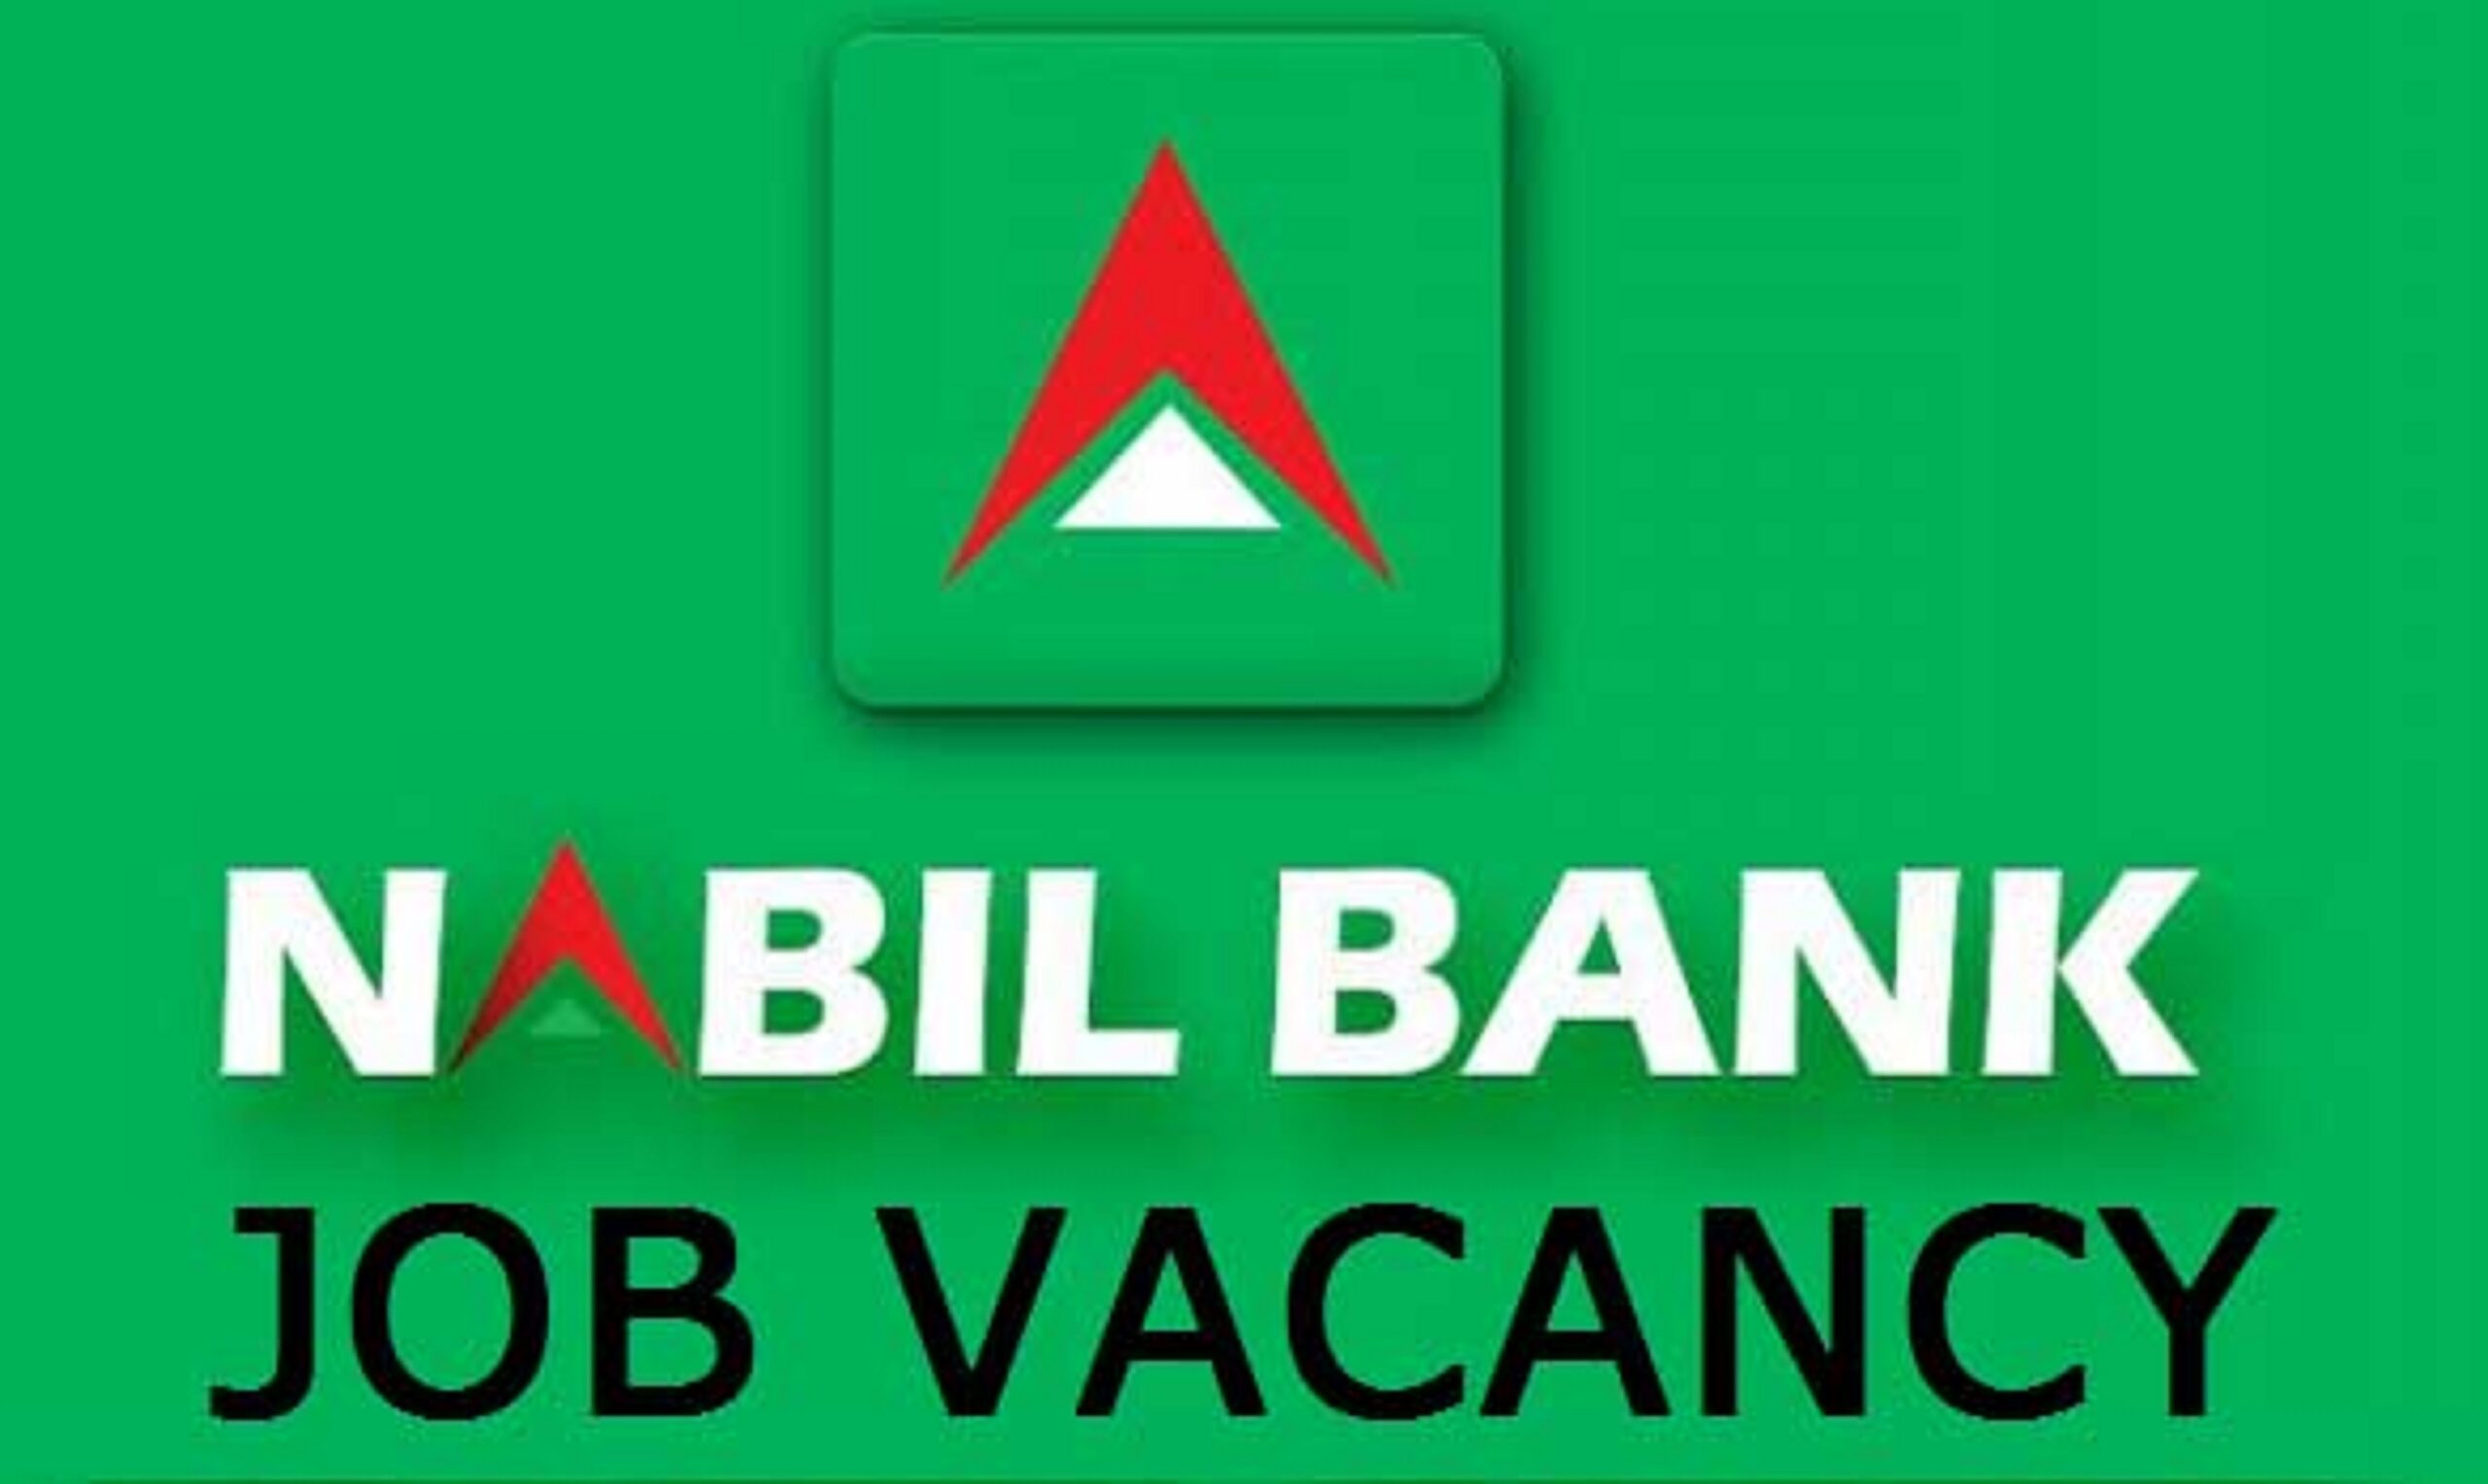 Job Vacancy Notice from Nabil Bank Limited